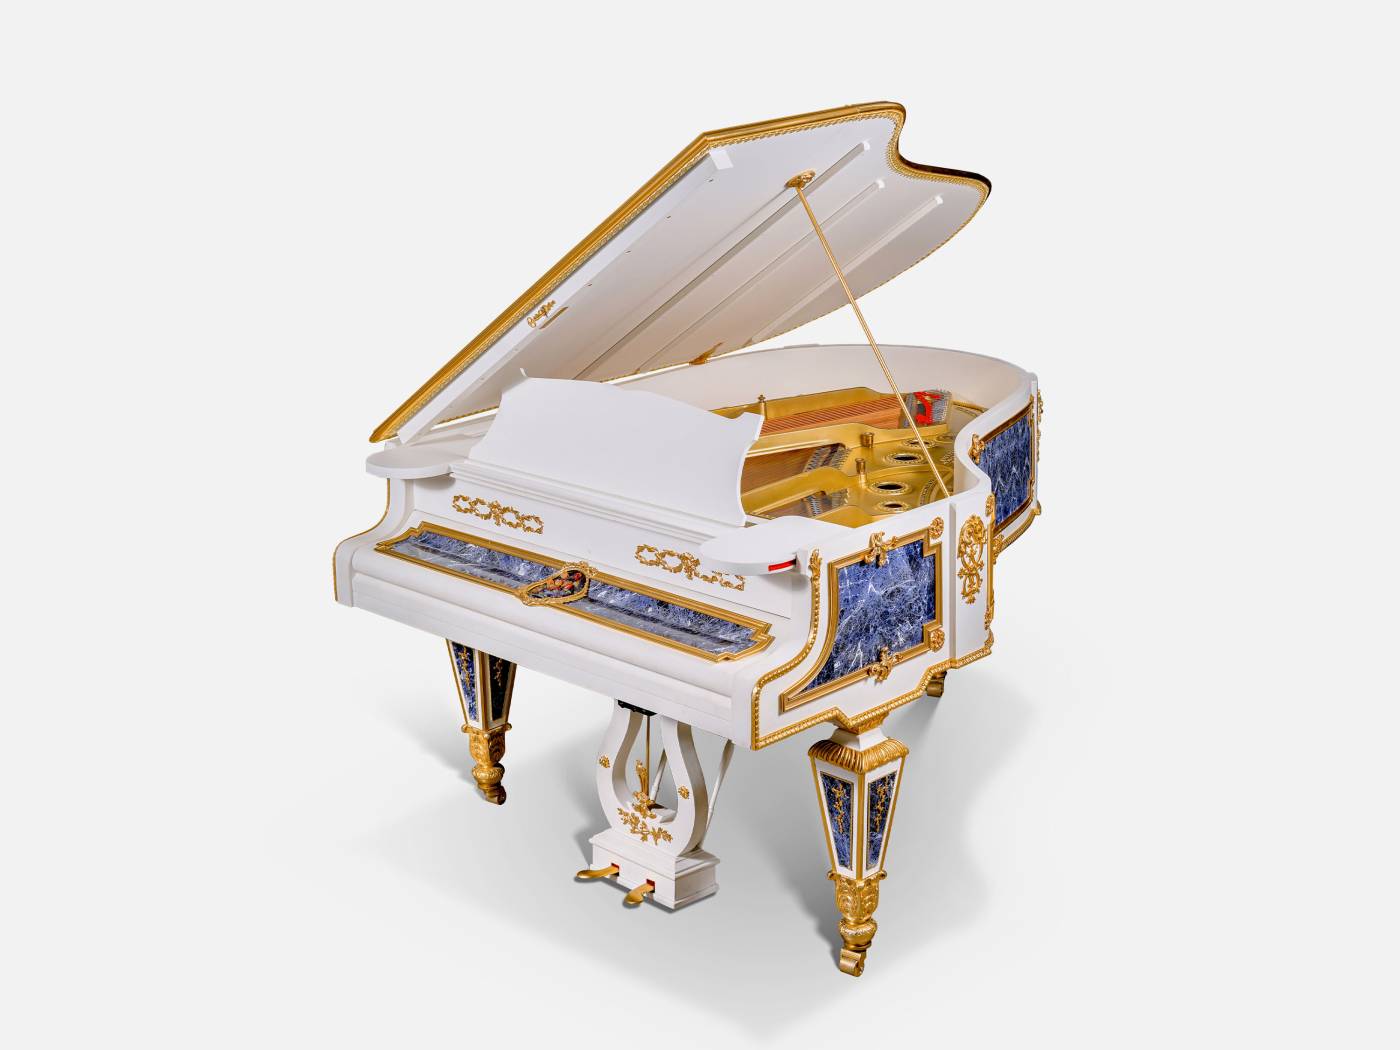 ART. 2729 – Discover the elegance of luxury classic Pianos made in Italy by C.G. Capelletti. Luxury classic furniture that combines style and craftsmanship.